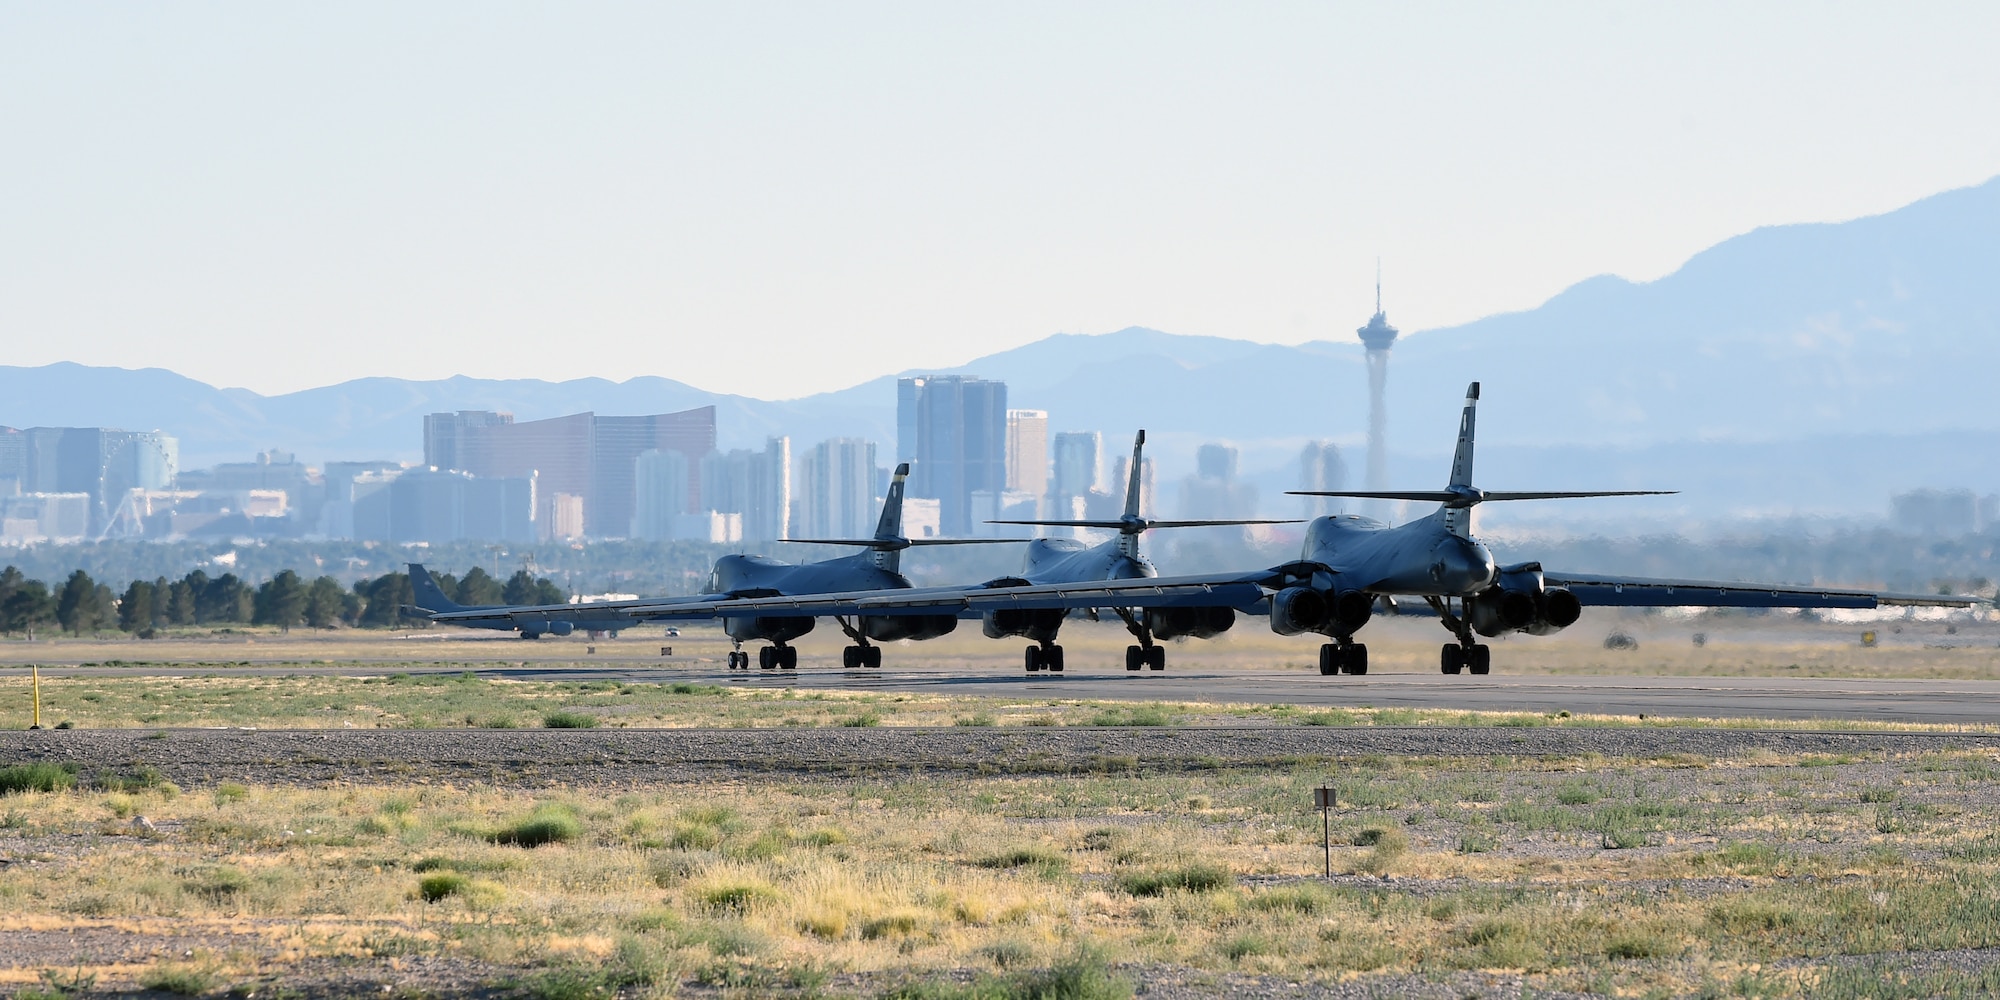 Three B-1B Lancers taxi down the runway at Nellis Air Force Base, Nev., June 14, 2017. Airmen assigned to the 337th Test and Evaluation Squadron spent time at Nellis AFB testing new software for Sustainment Block 17.